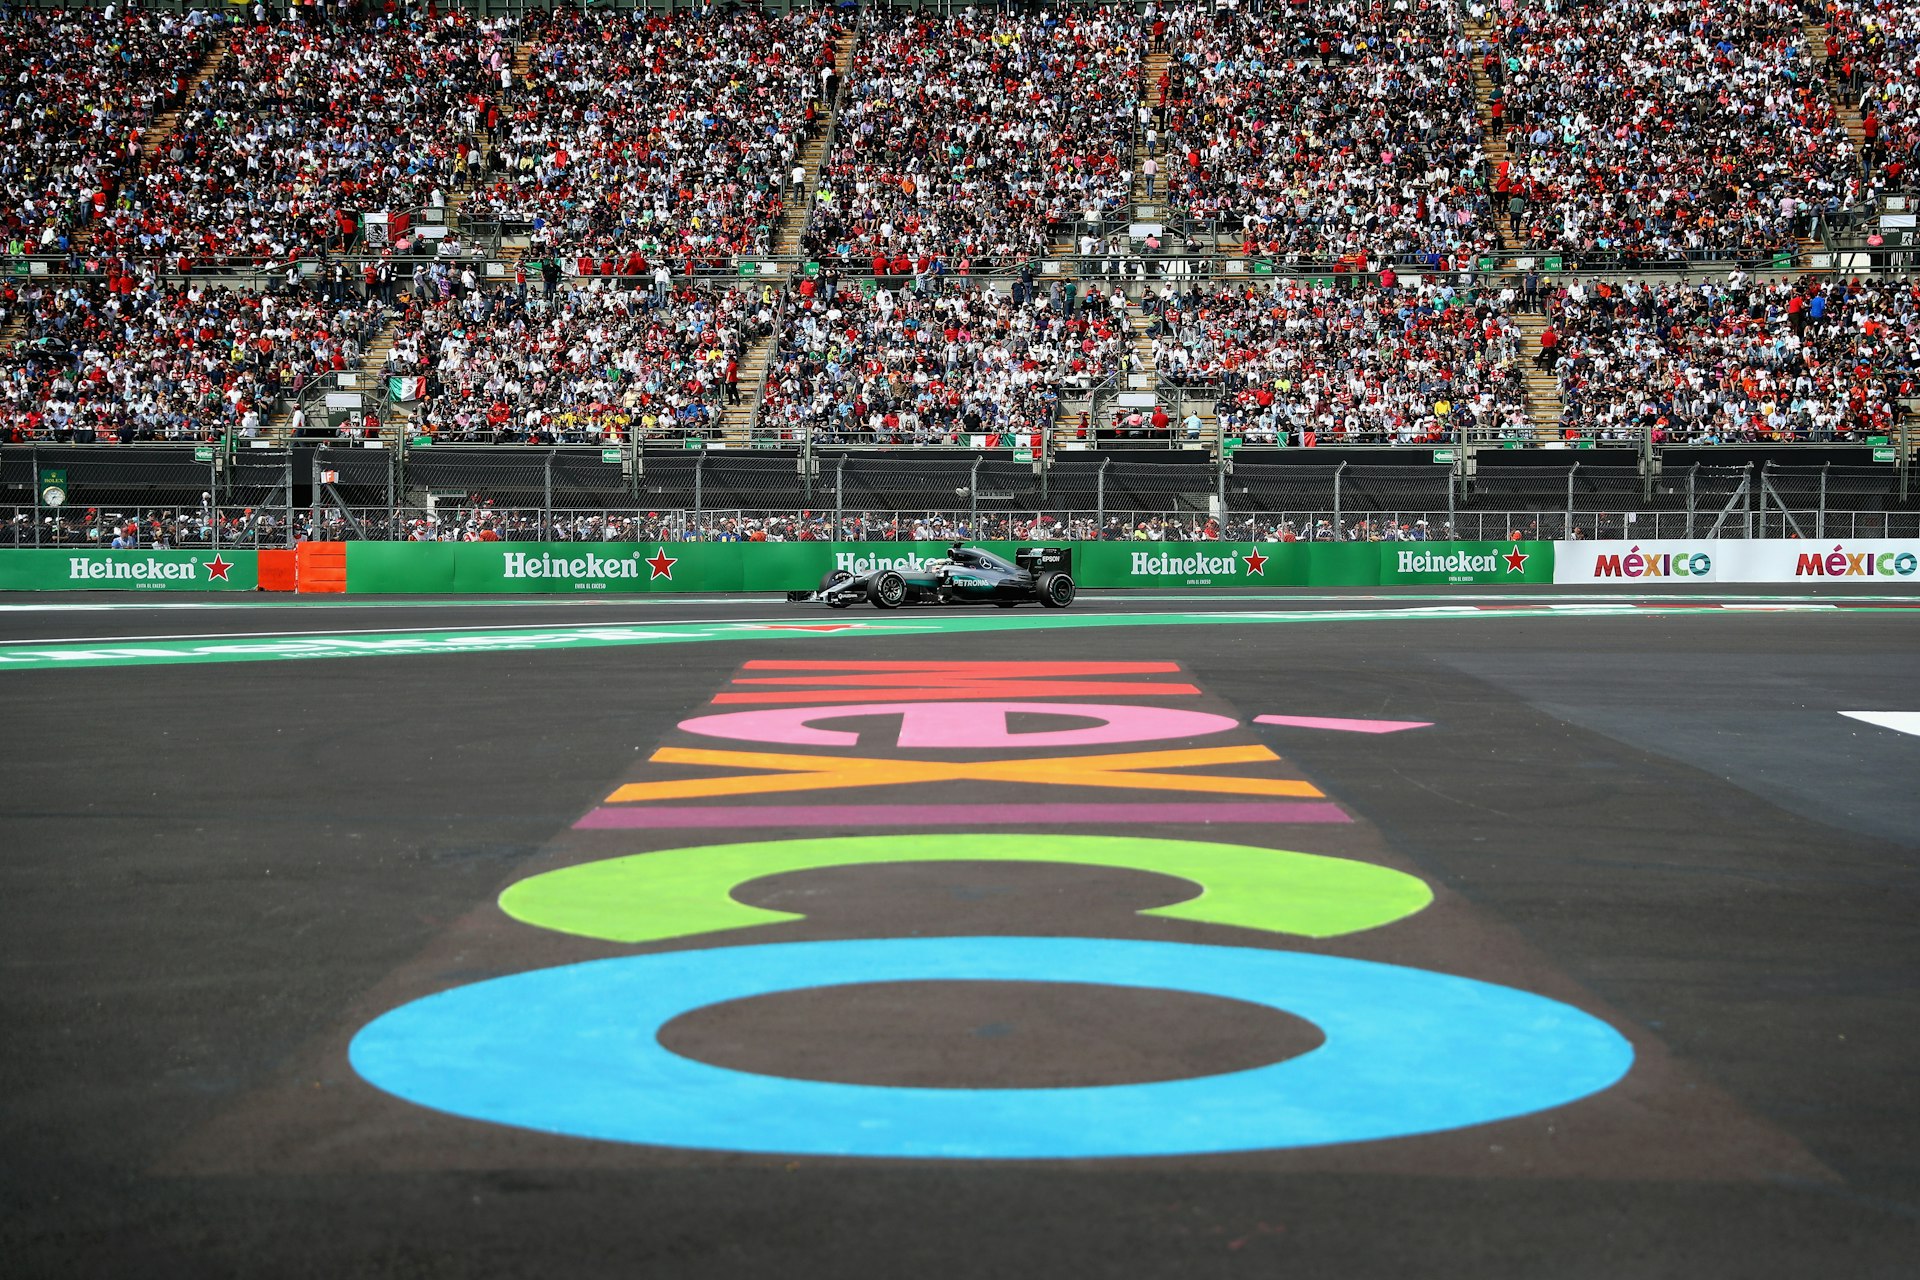 A Formula 1 racing car on a track with thousands of spectators in the stands watching on